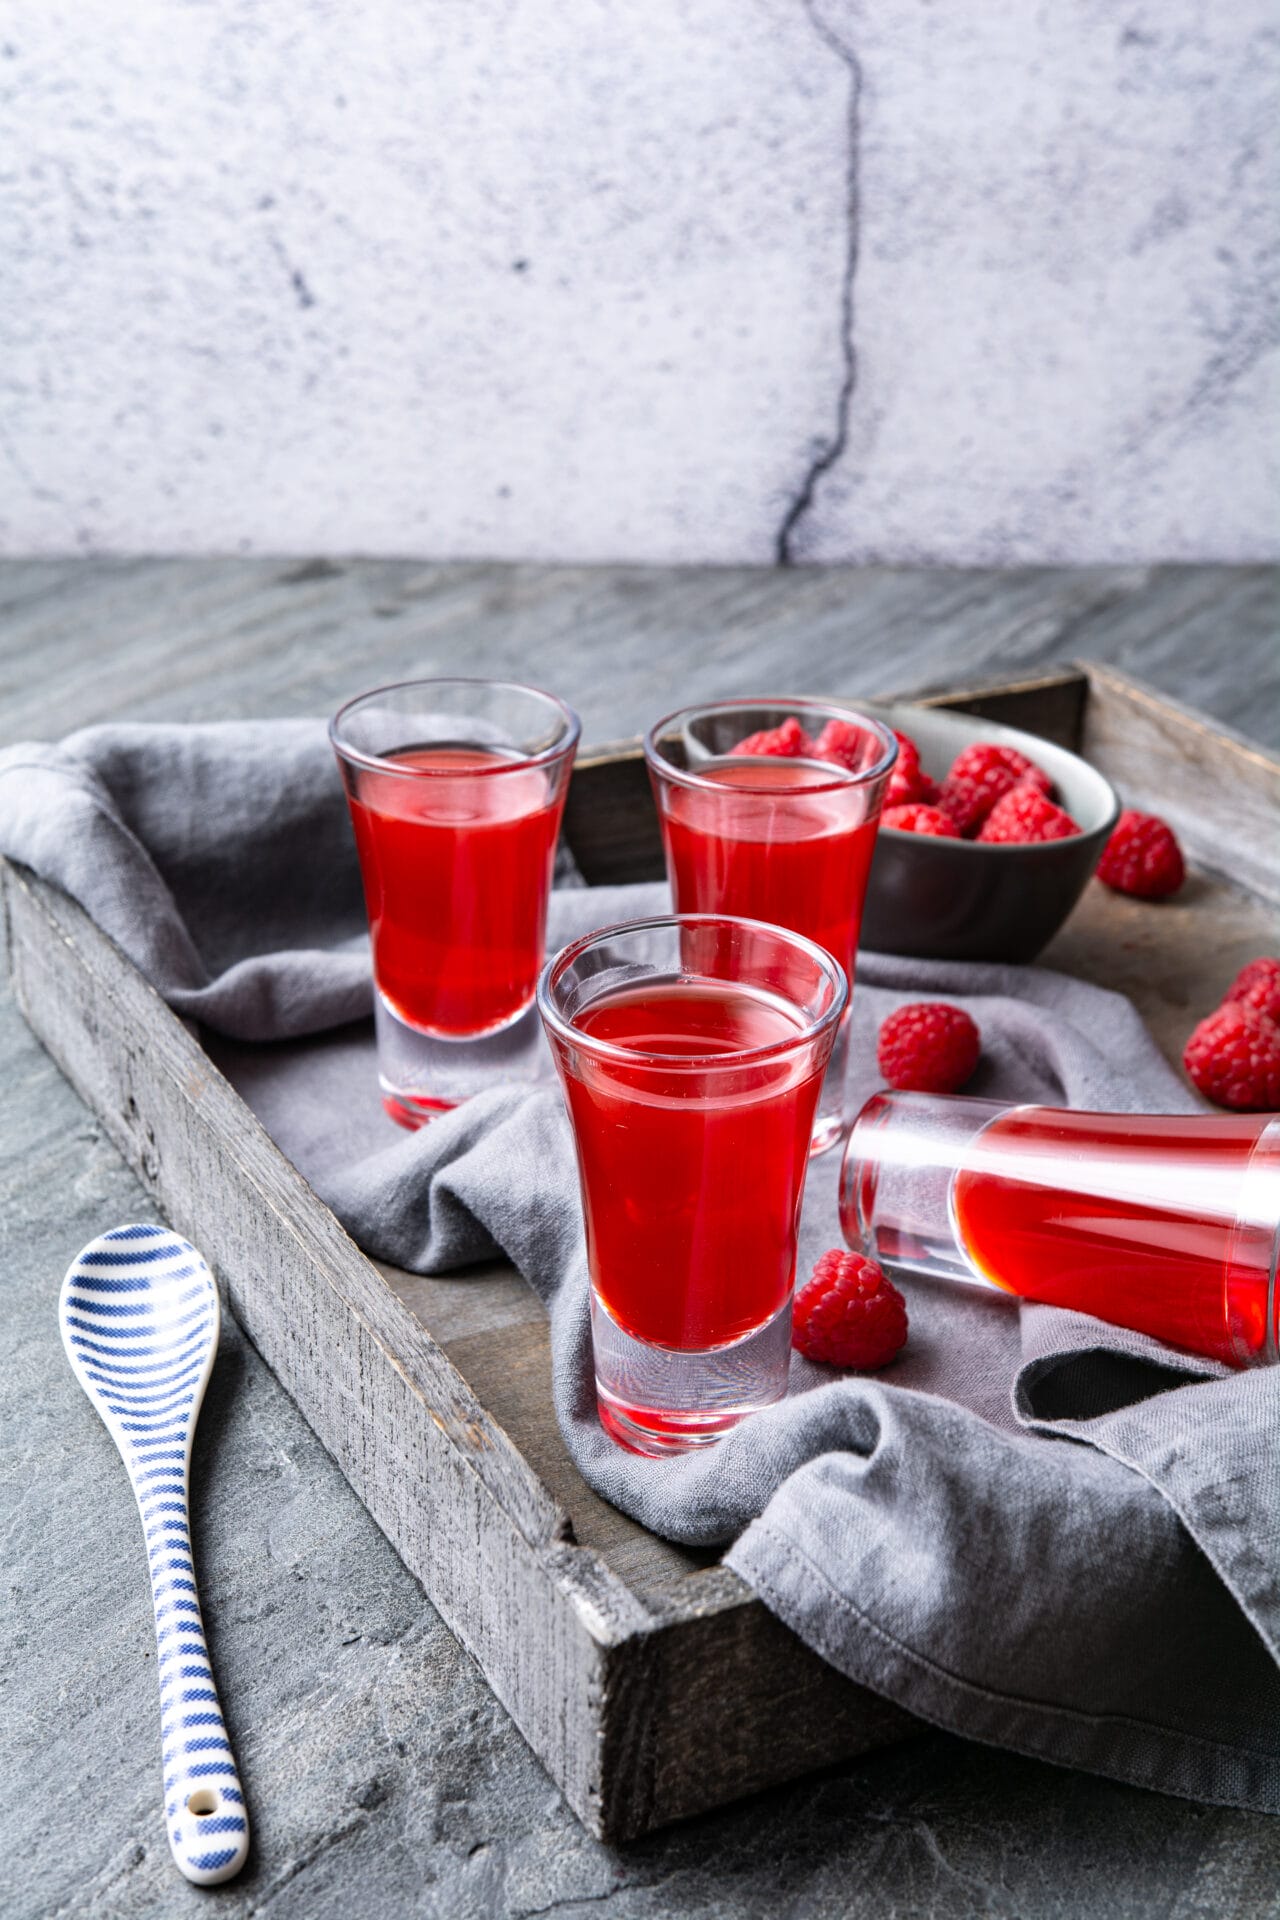 How to Make Jello Shots featured image above